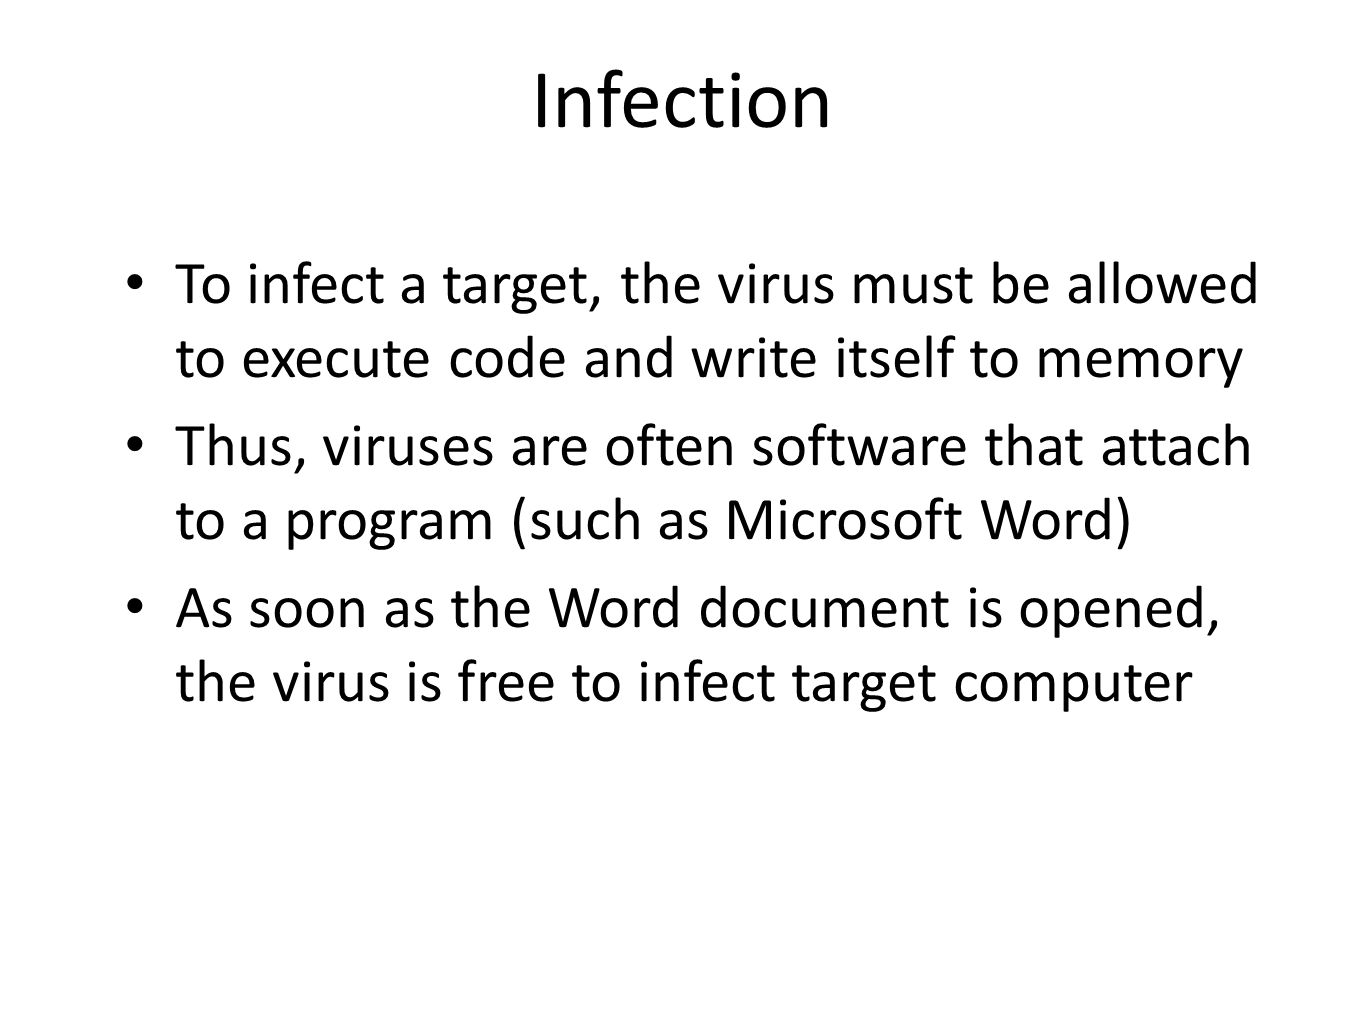 Infection To infect a target, the virus must be allowed to execute code and write itself to memory Thus, viruses are often software that attach to a program (such as Microsoft Word) As soon as the Word document is opened, the virus is free to infect target computer